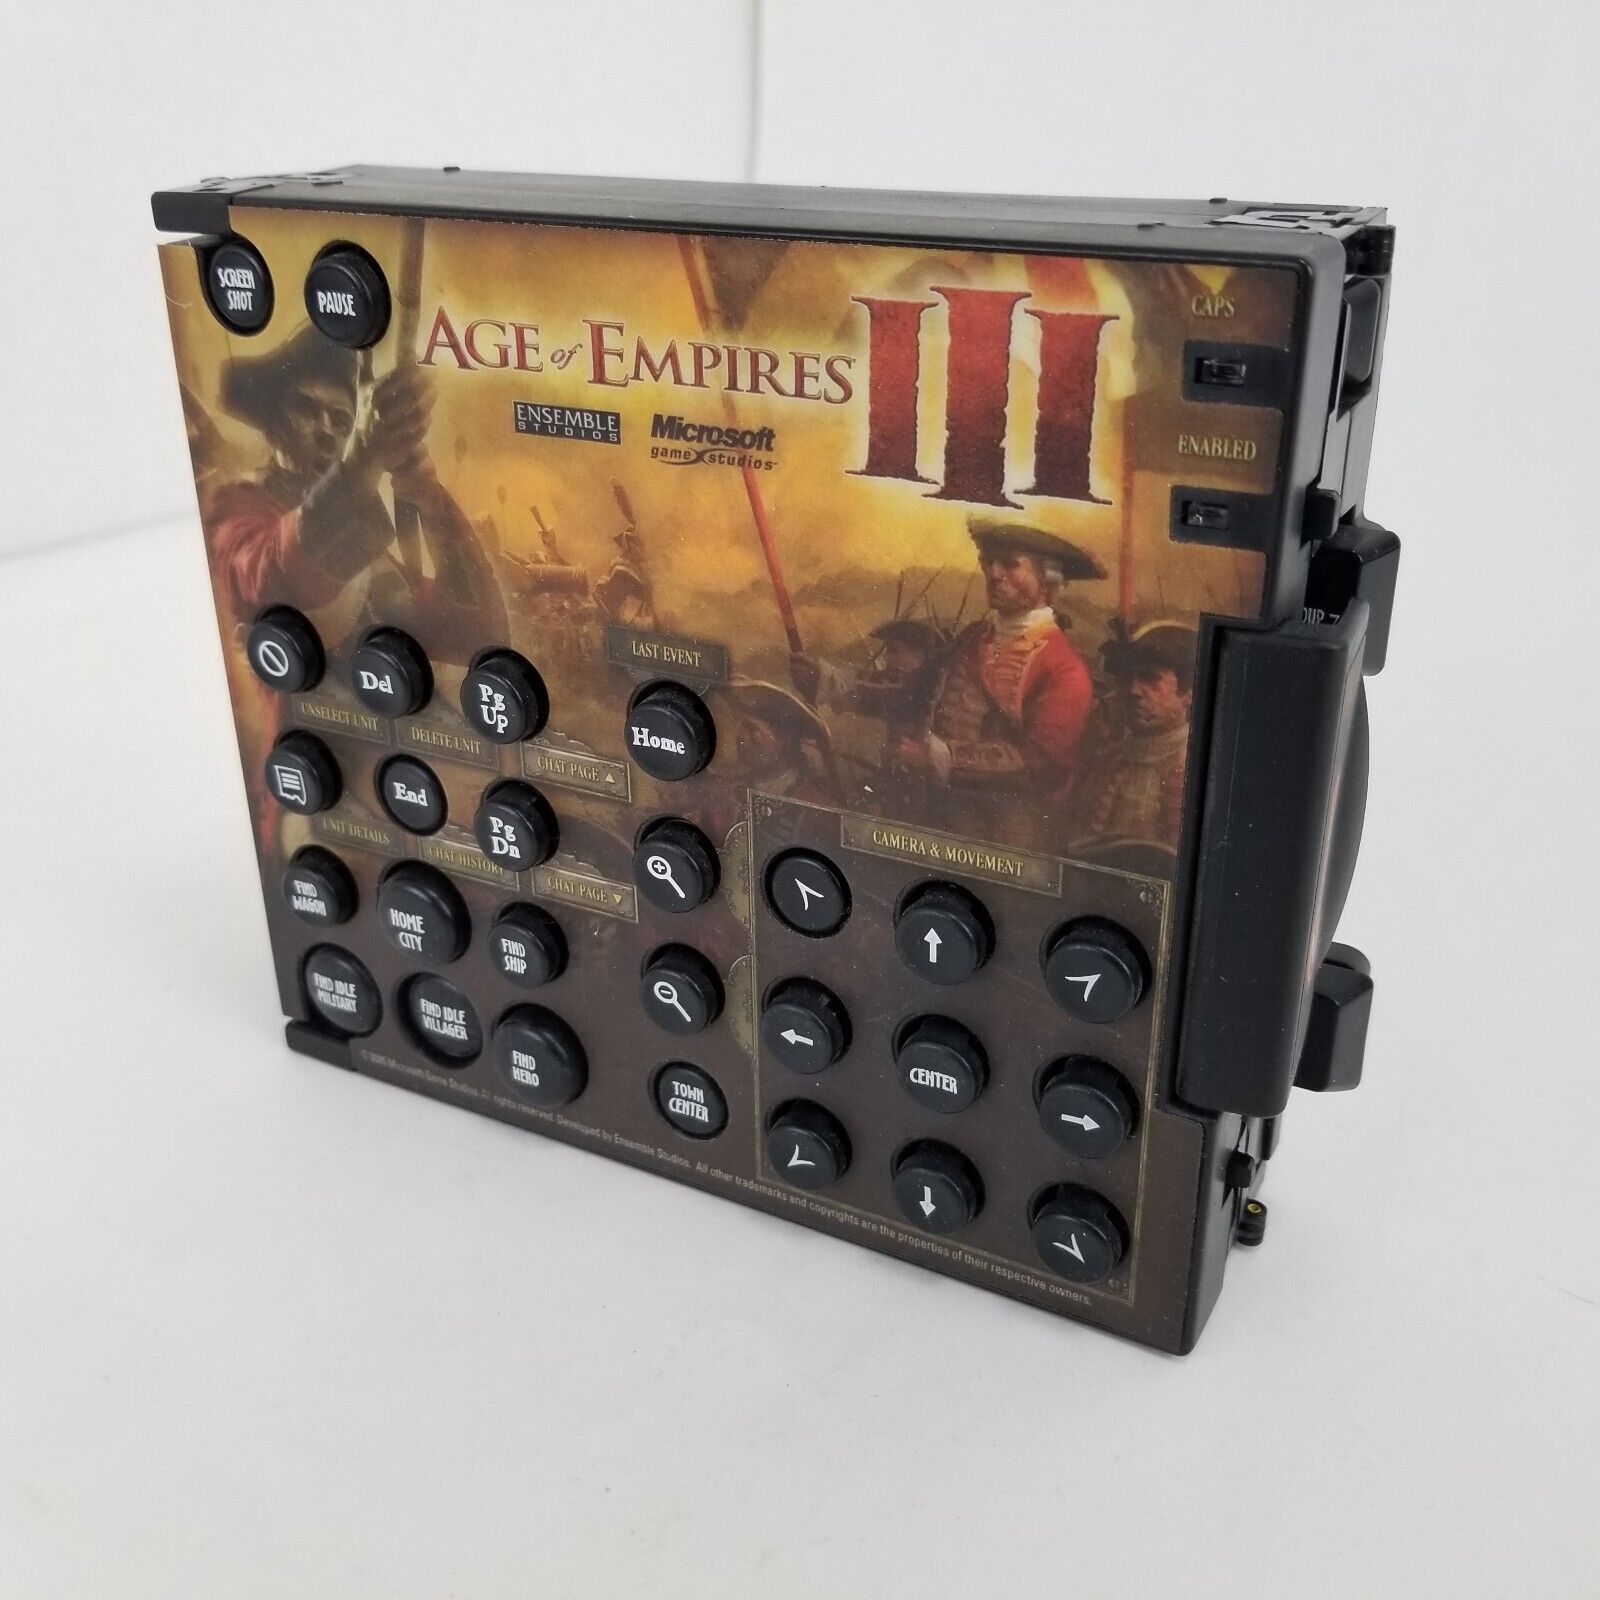 Z Board Ideazon Age of Empires 3 Limited Ed Gaming Keyset Keyboard Cover